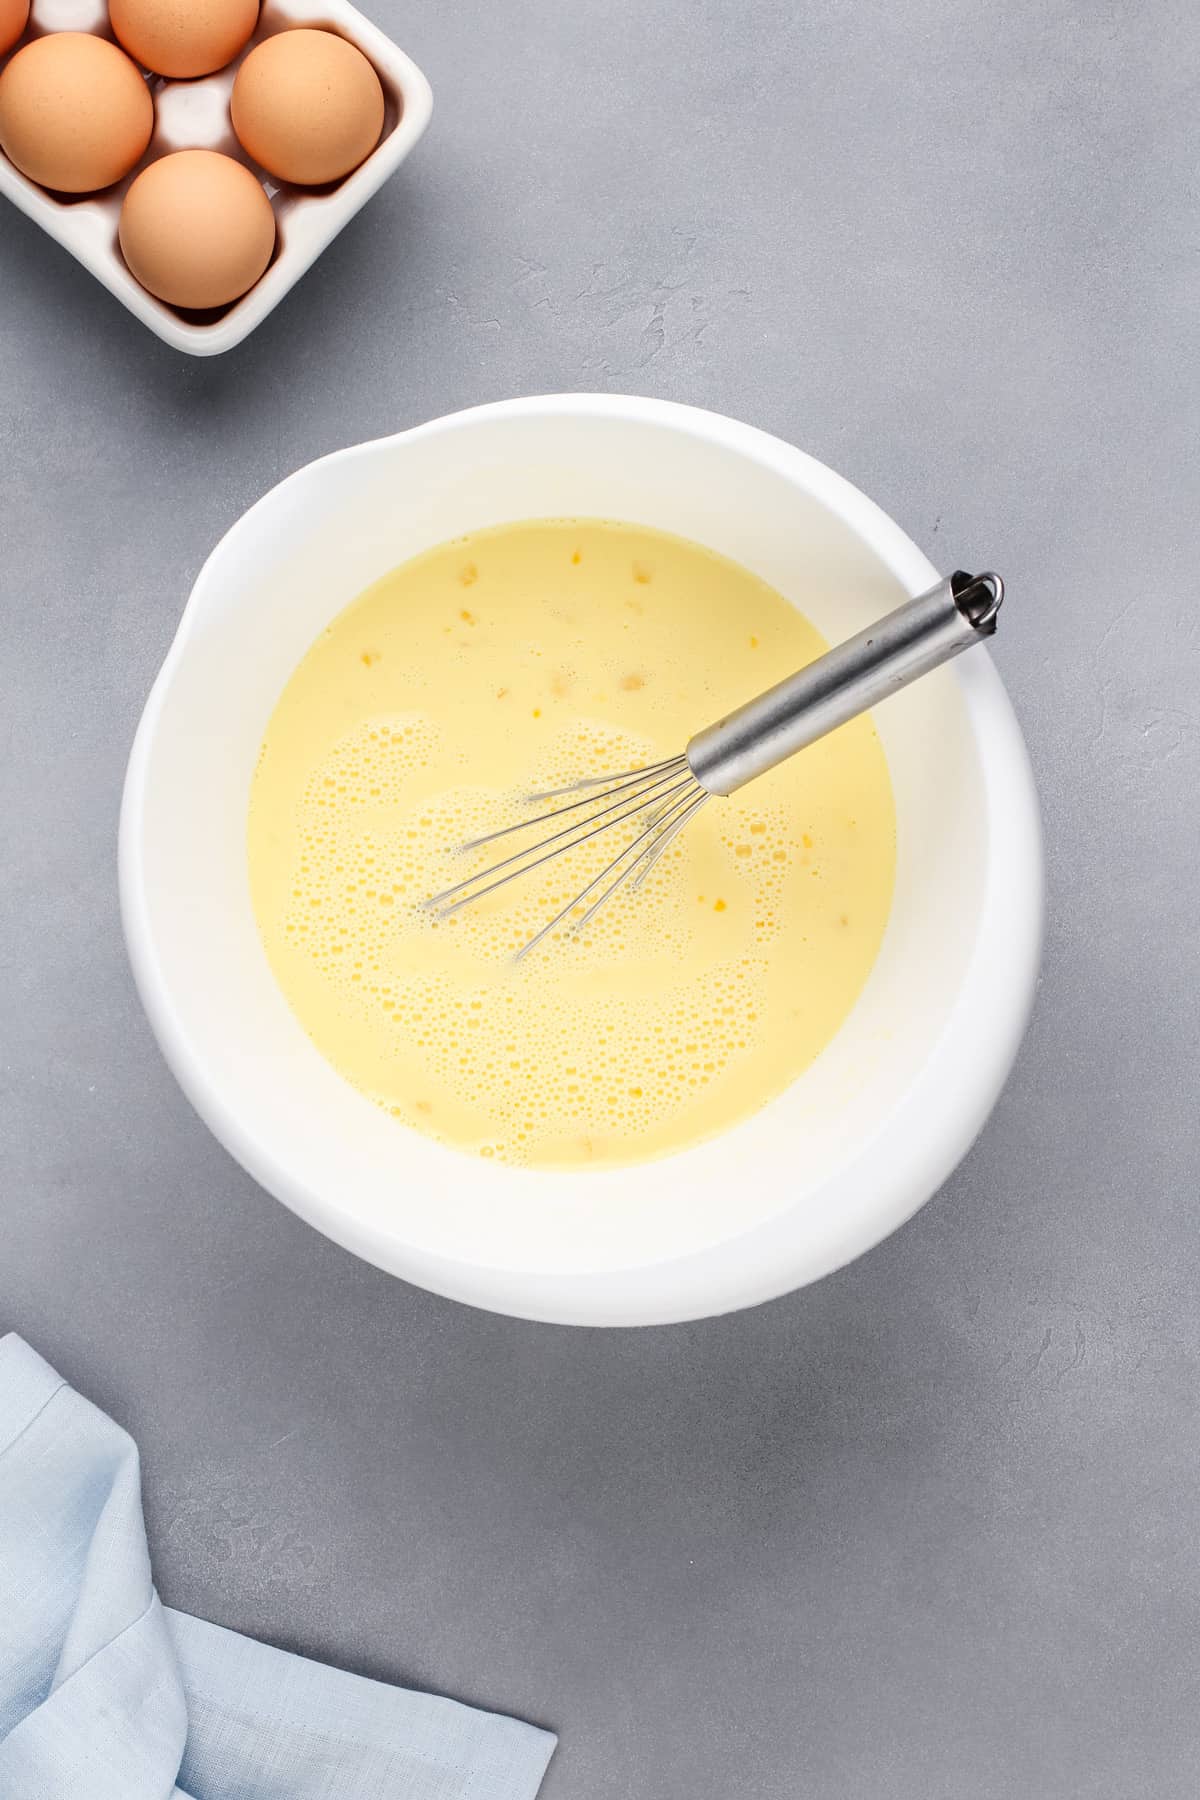 Eggs and milk whisked in a large mixing bowl.